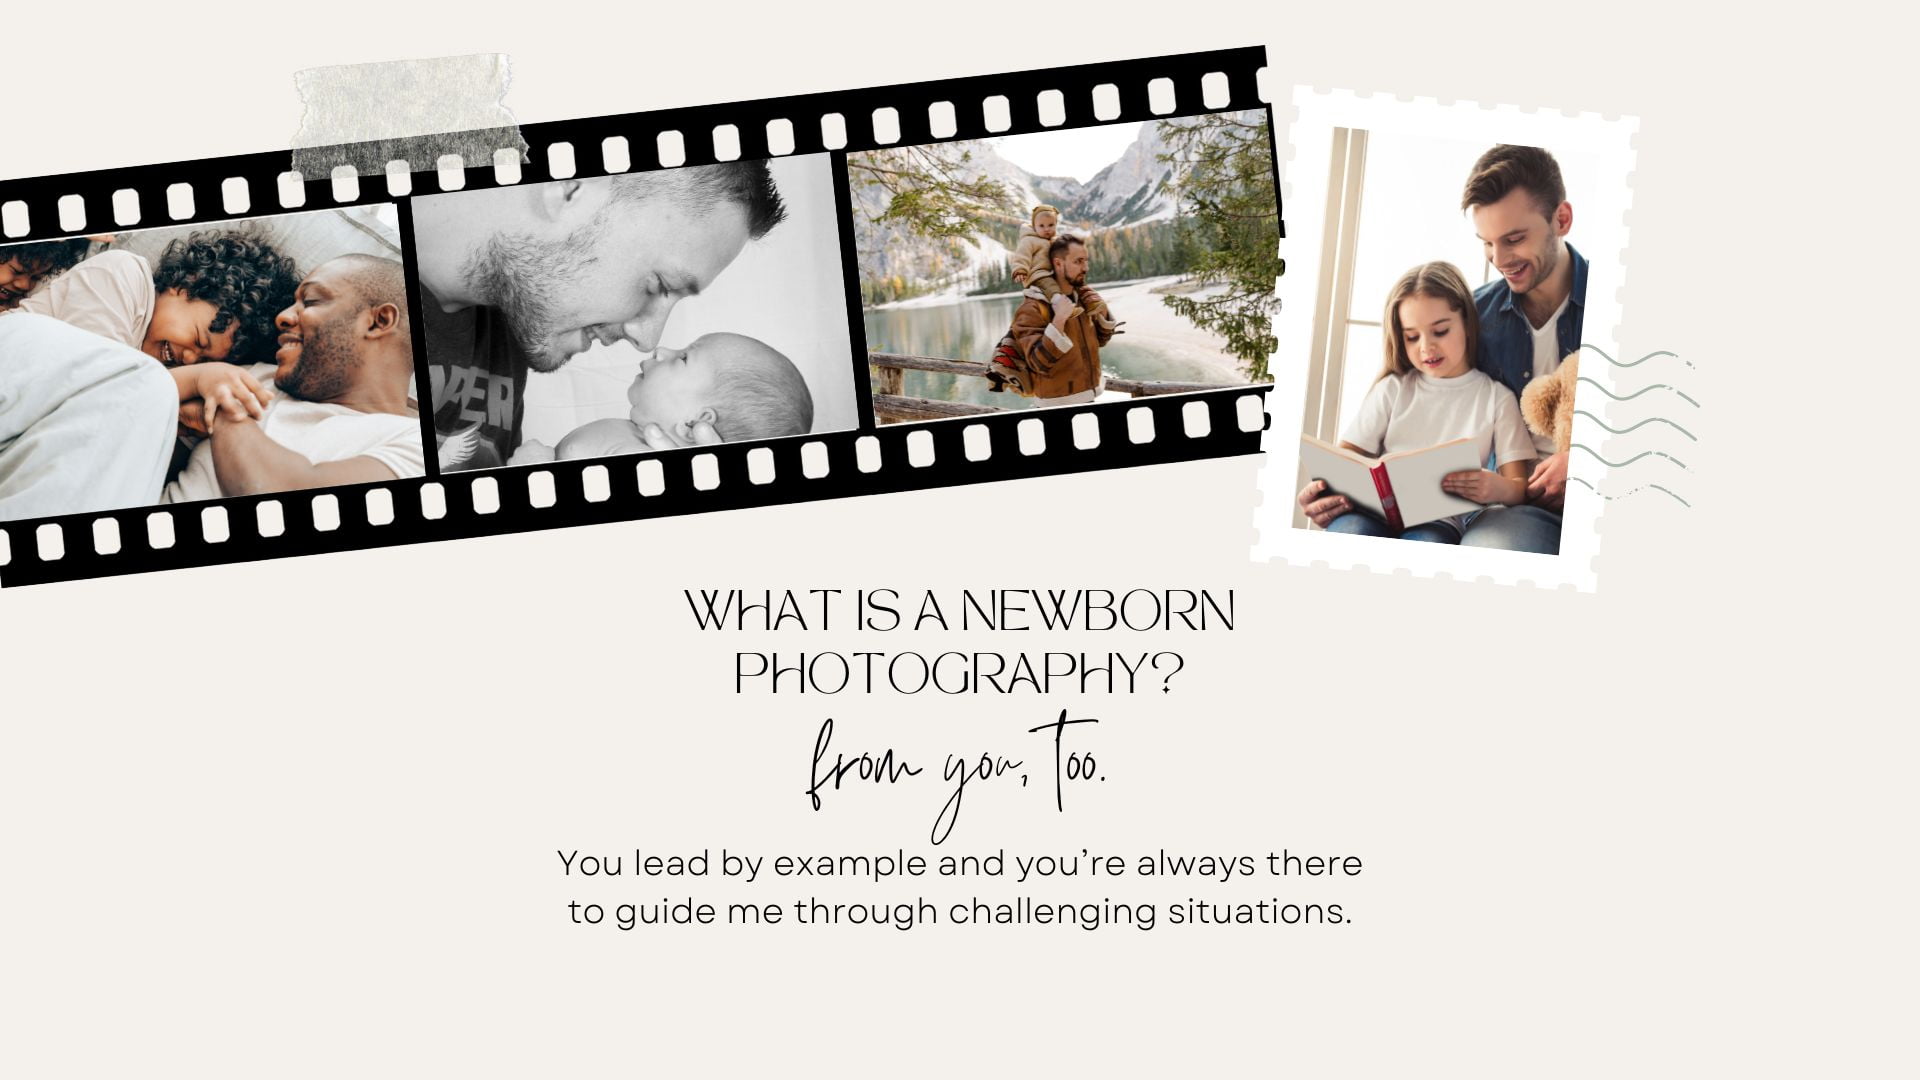 What is a newborn photography?